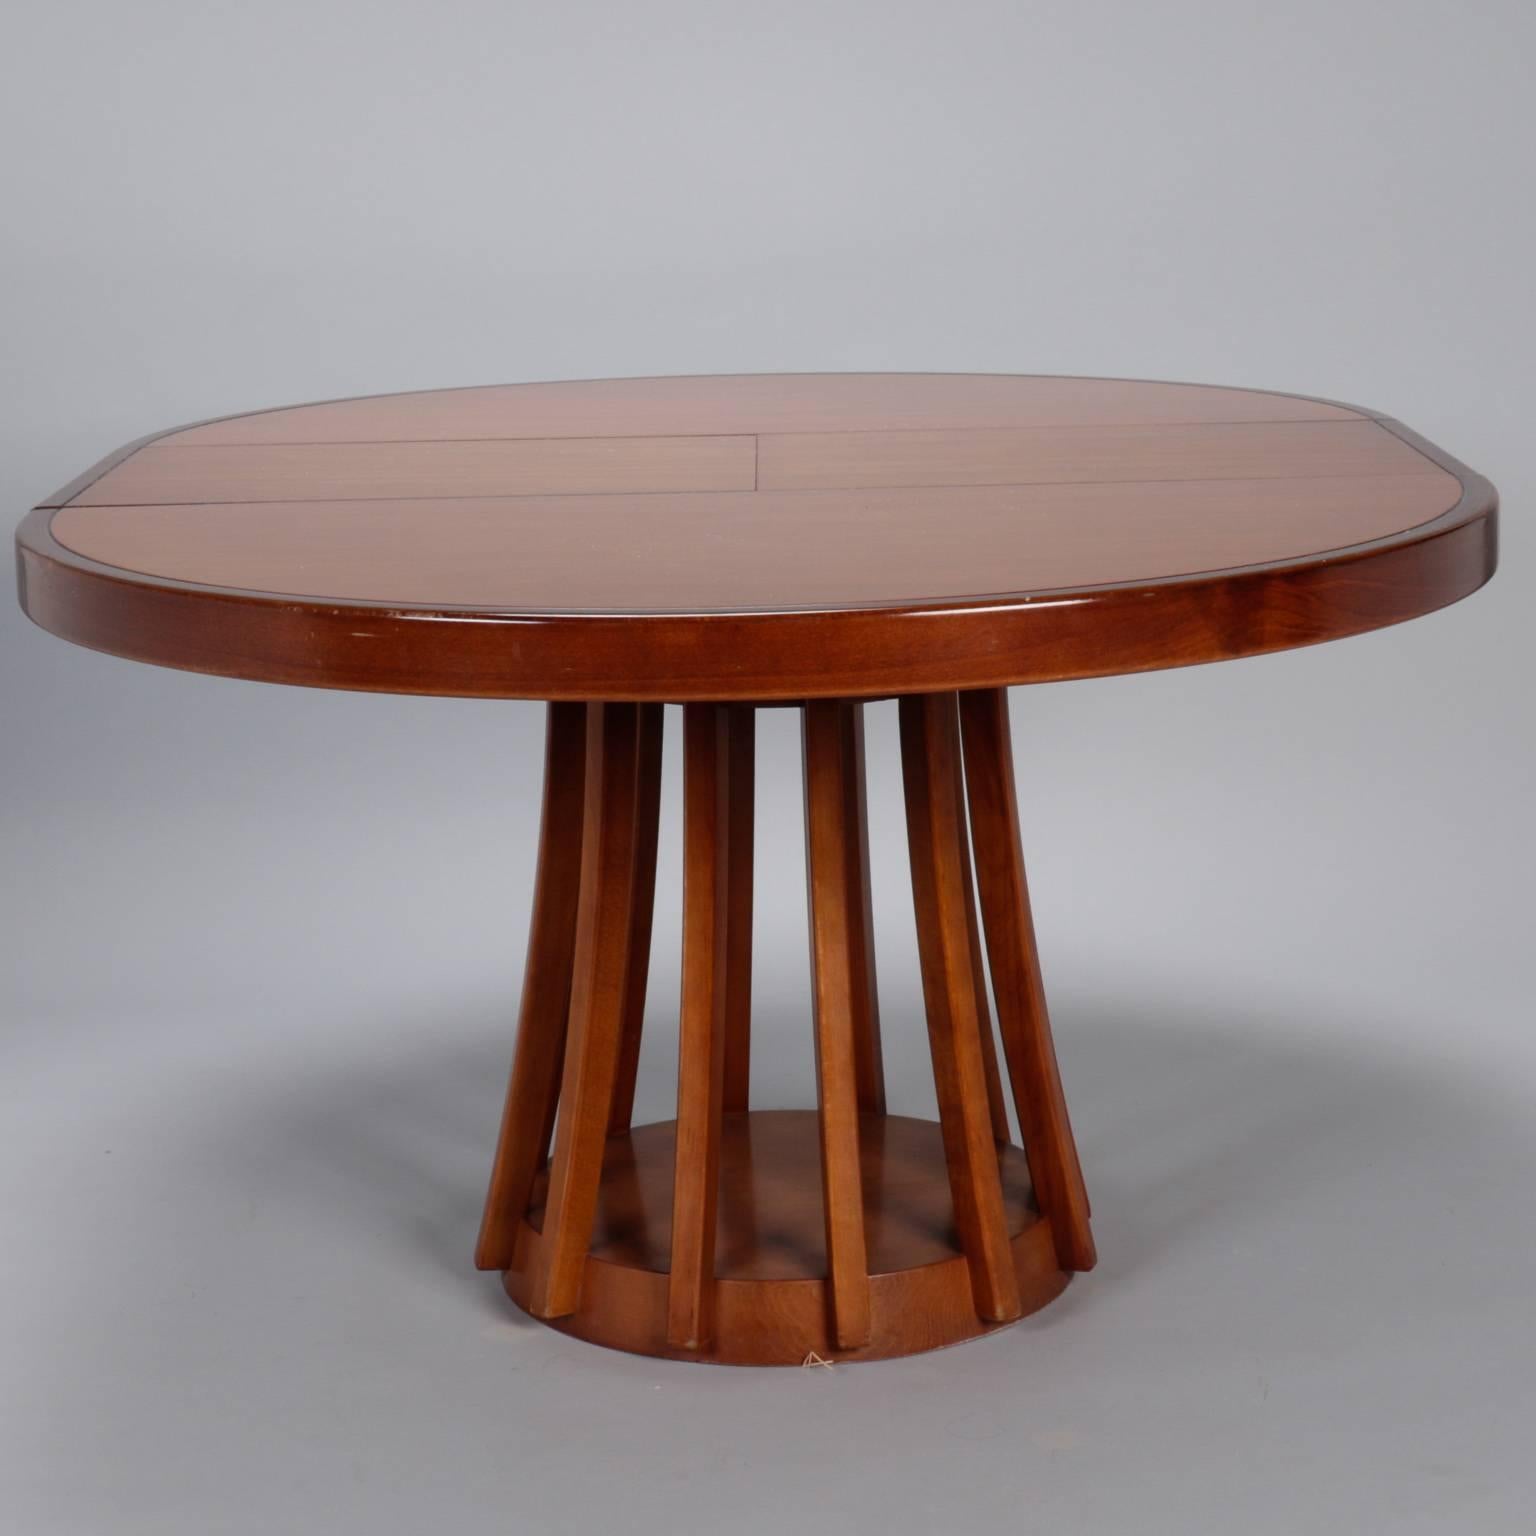 Round walnut dining table with contrasting darker band, slatted center support and round pedestal base, circa 1960s. Self storing butterfly leaf adds 16”. Found in Italy, no manufacturer’s marks found. Some minor scuffs to surface finish.
   